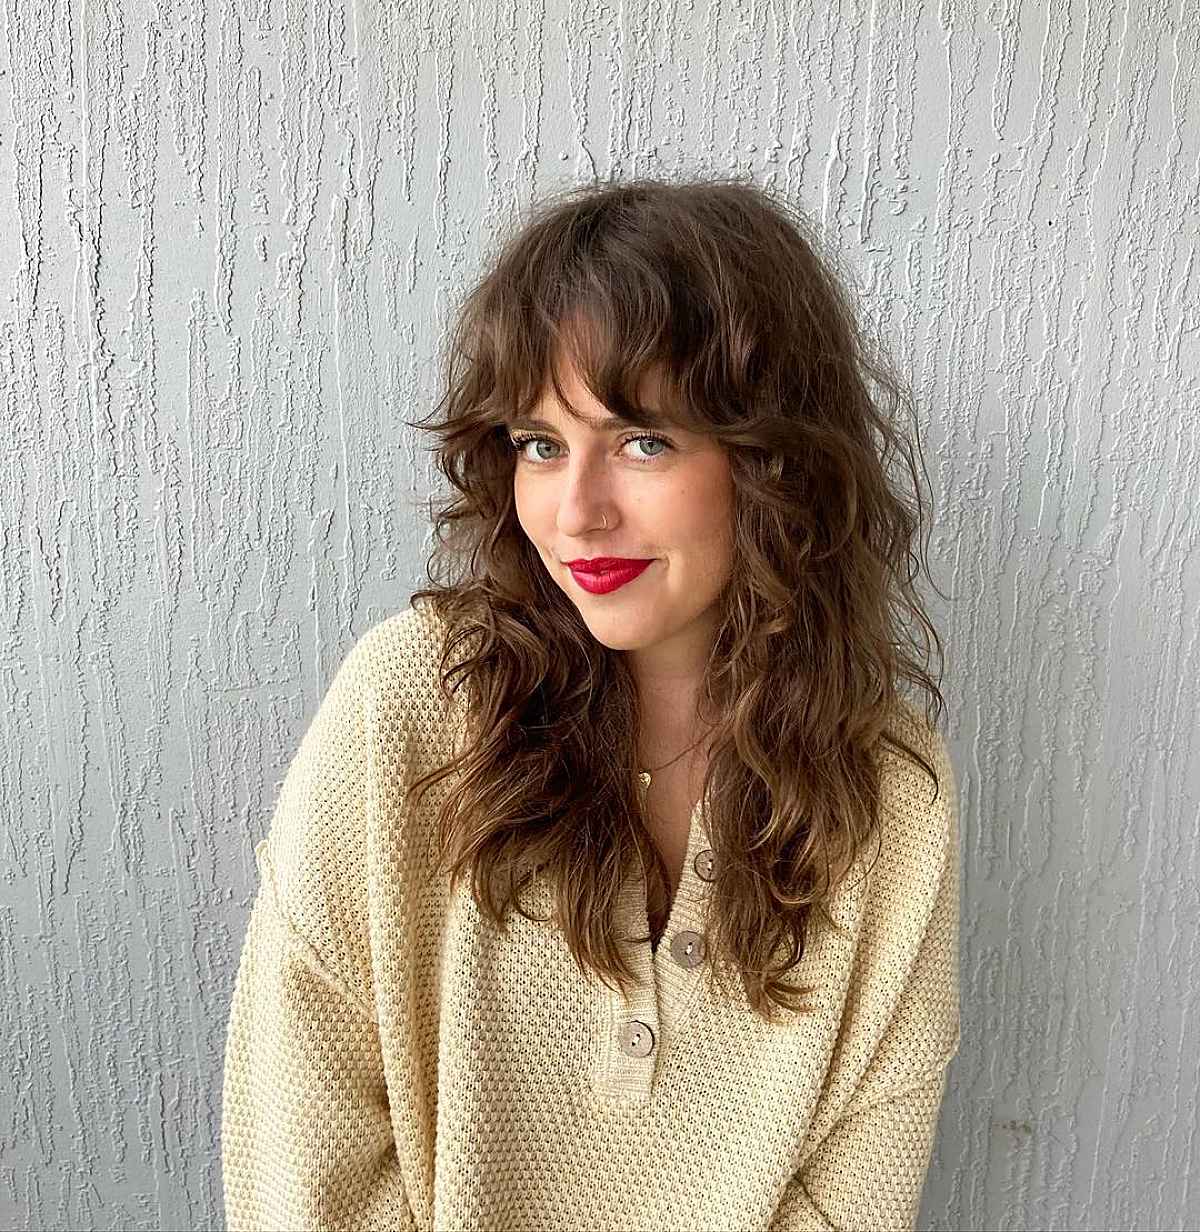 Razored Shag Cut with Tousled Waves